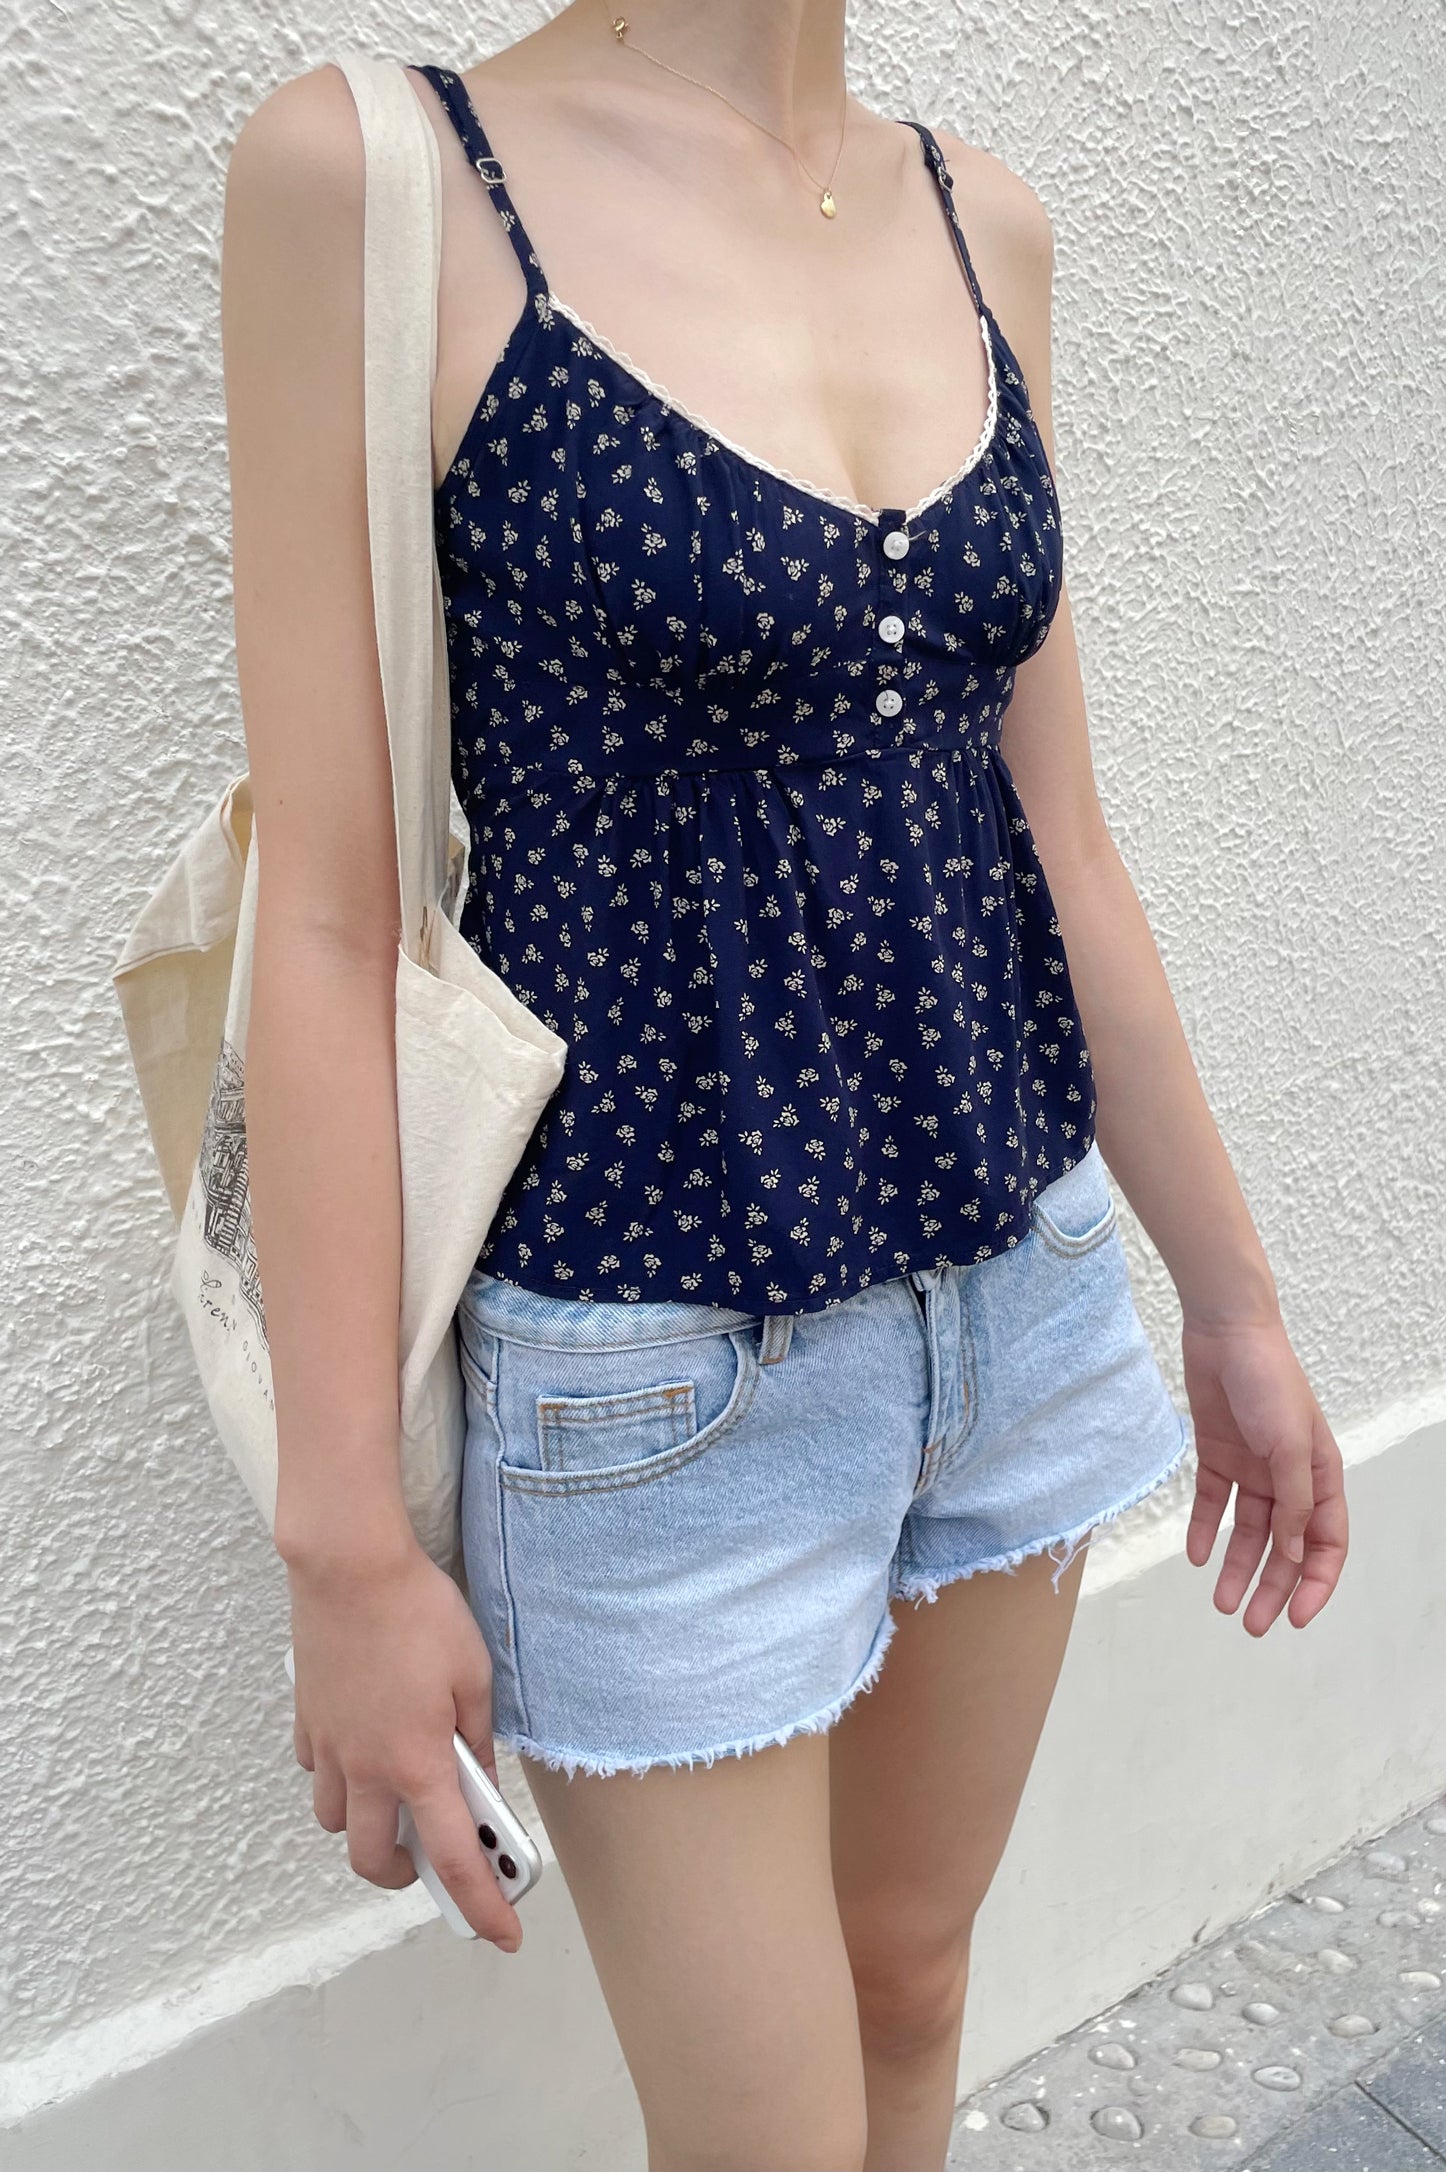 Hi! I'm currently looking for the Brandy Melville Tiffany Button Up tank.  It is so cute but I can not find the exact design for sale anywhere! Some  photos for reference: 